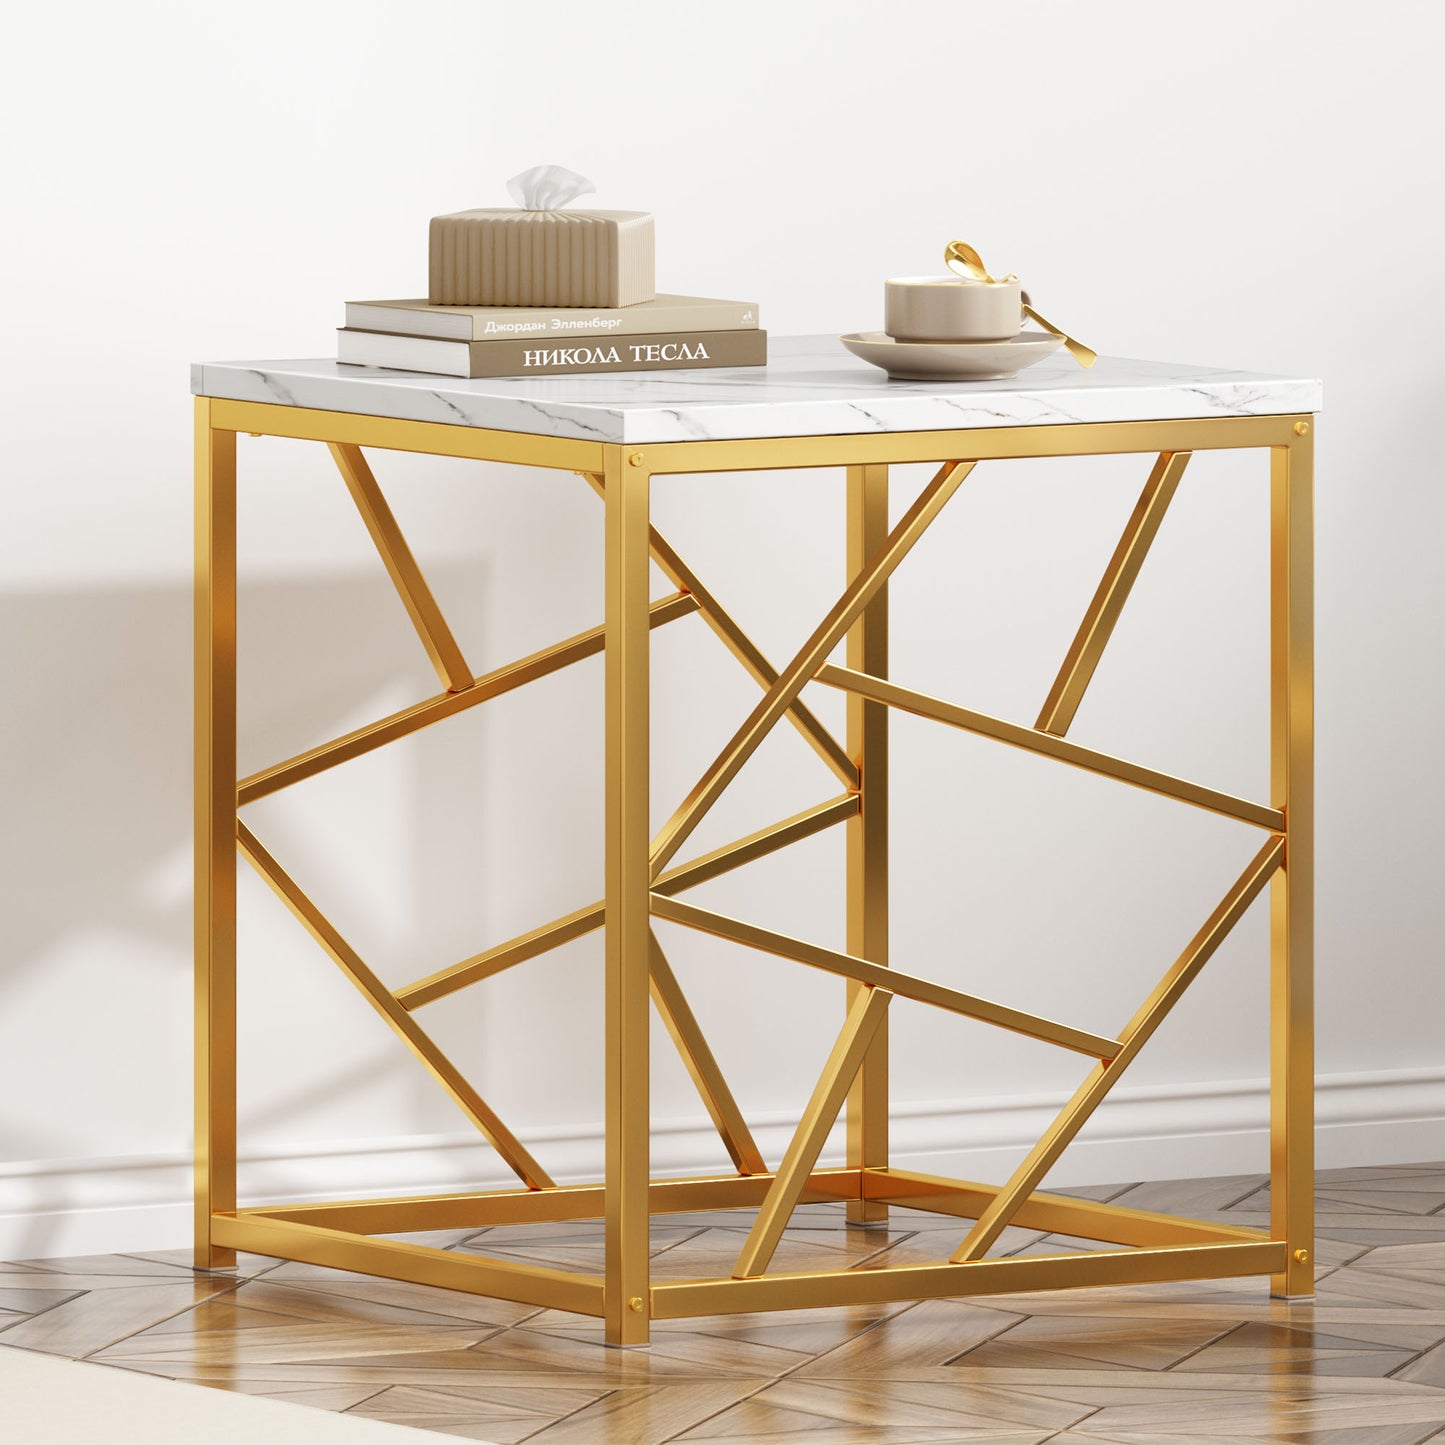 SogesPower Professional Square Side Table - Sturdy Structure, Durable and Stylish Coffee Table